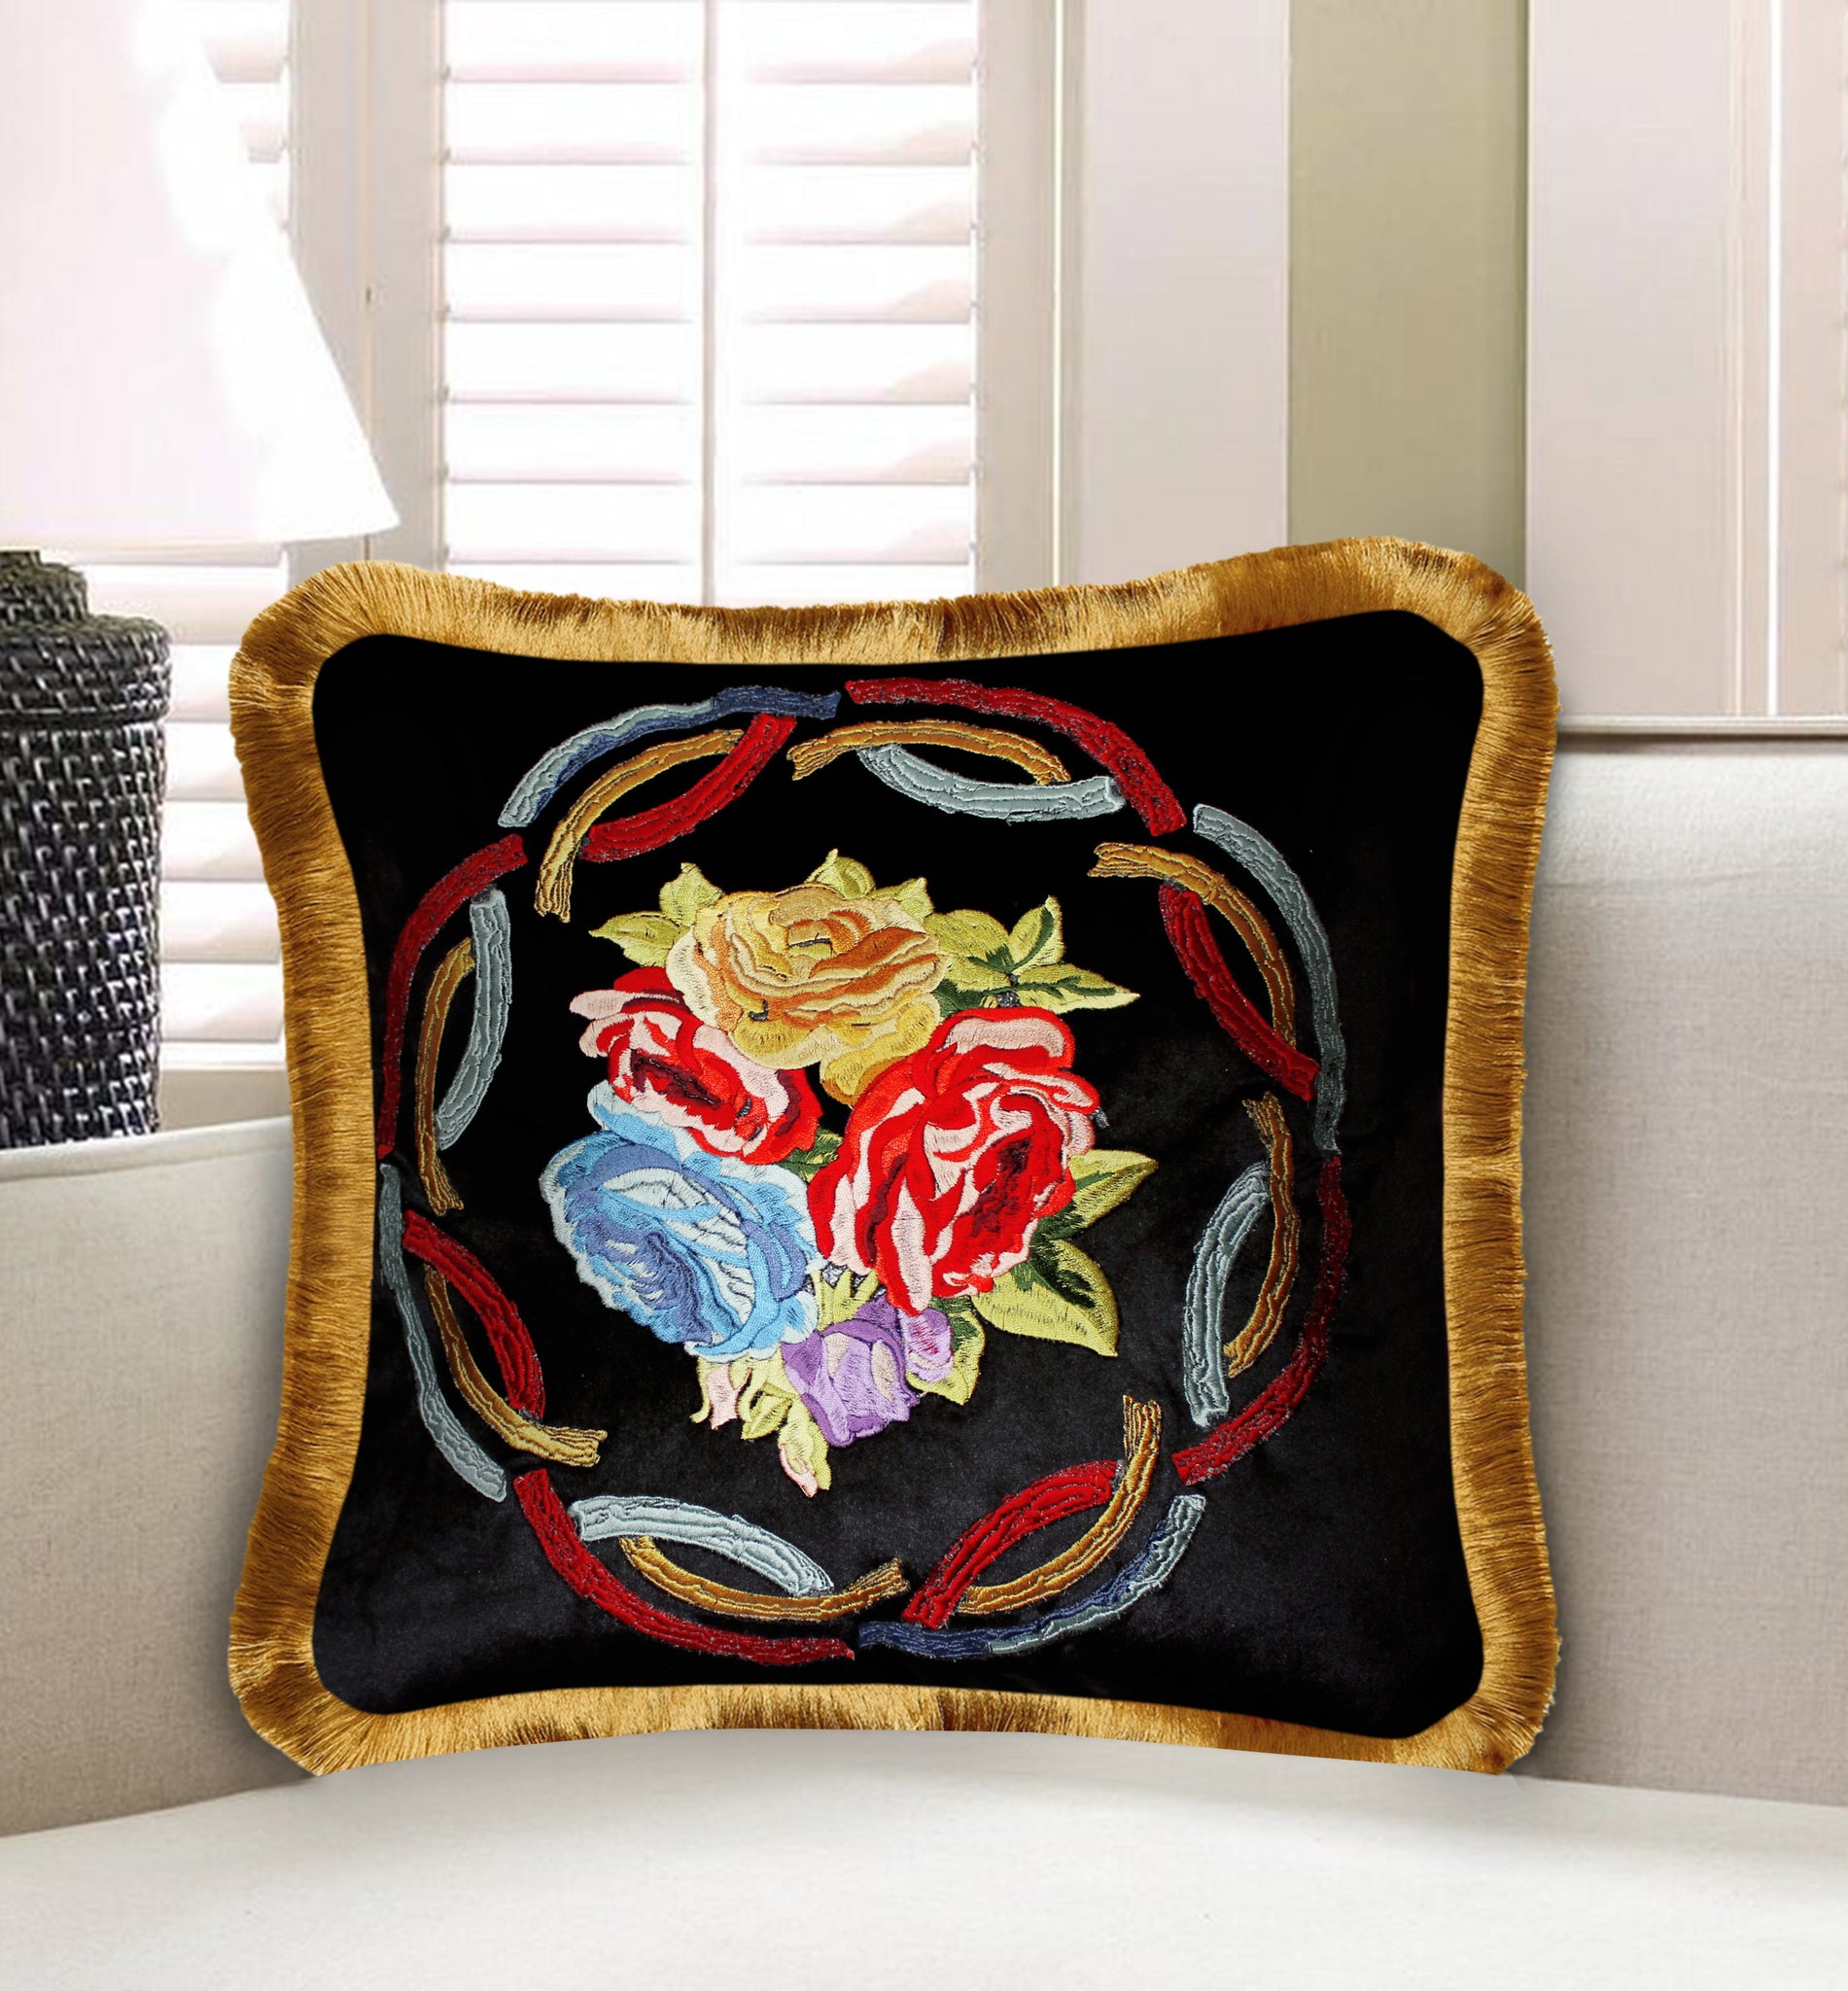  Velvet Cushion Cover Home Decor Colorful Rose Bouquet Decorative Pillowcase Embroidery Throw Pillow for Sofa Chair Bedroom Living Room Black 45x45 cm (18x18 Inches).